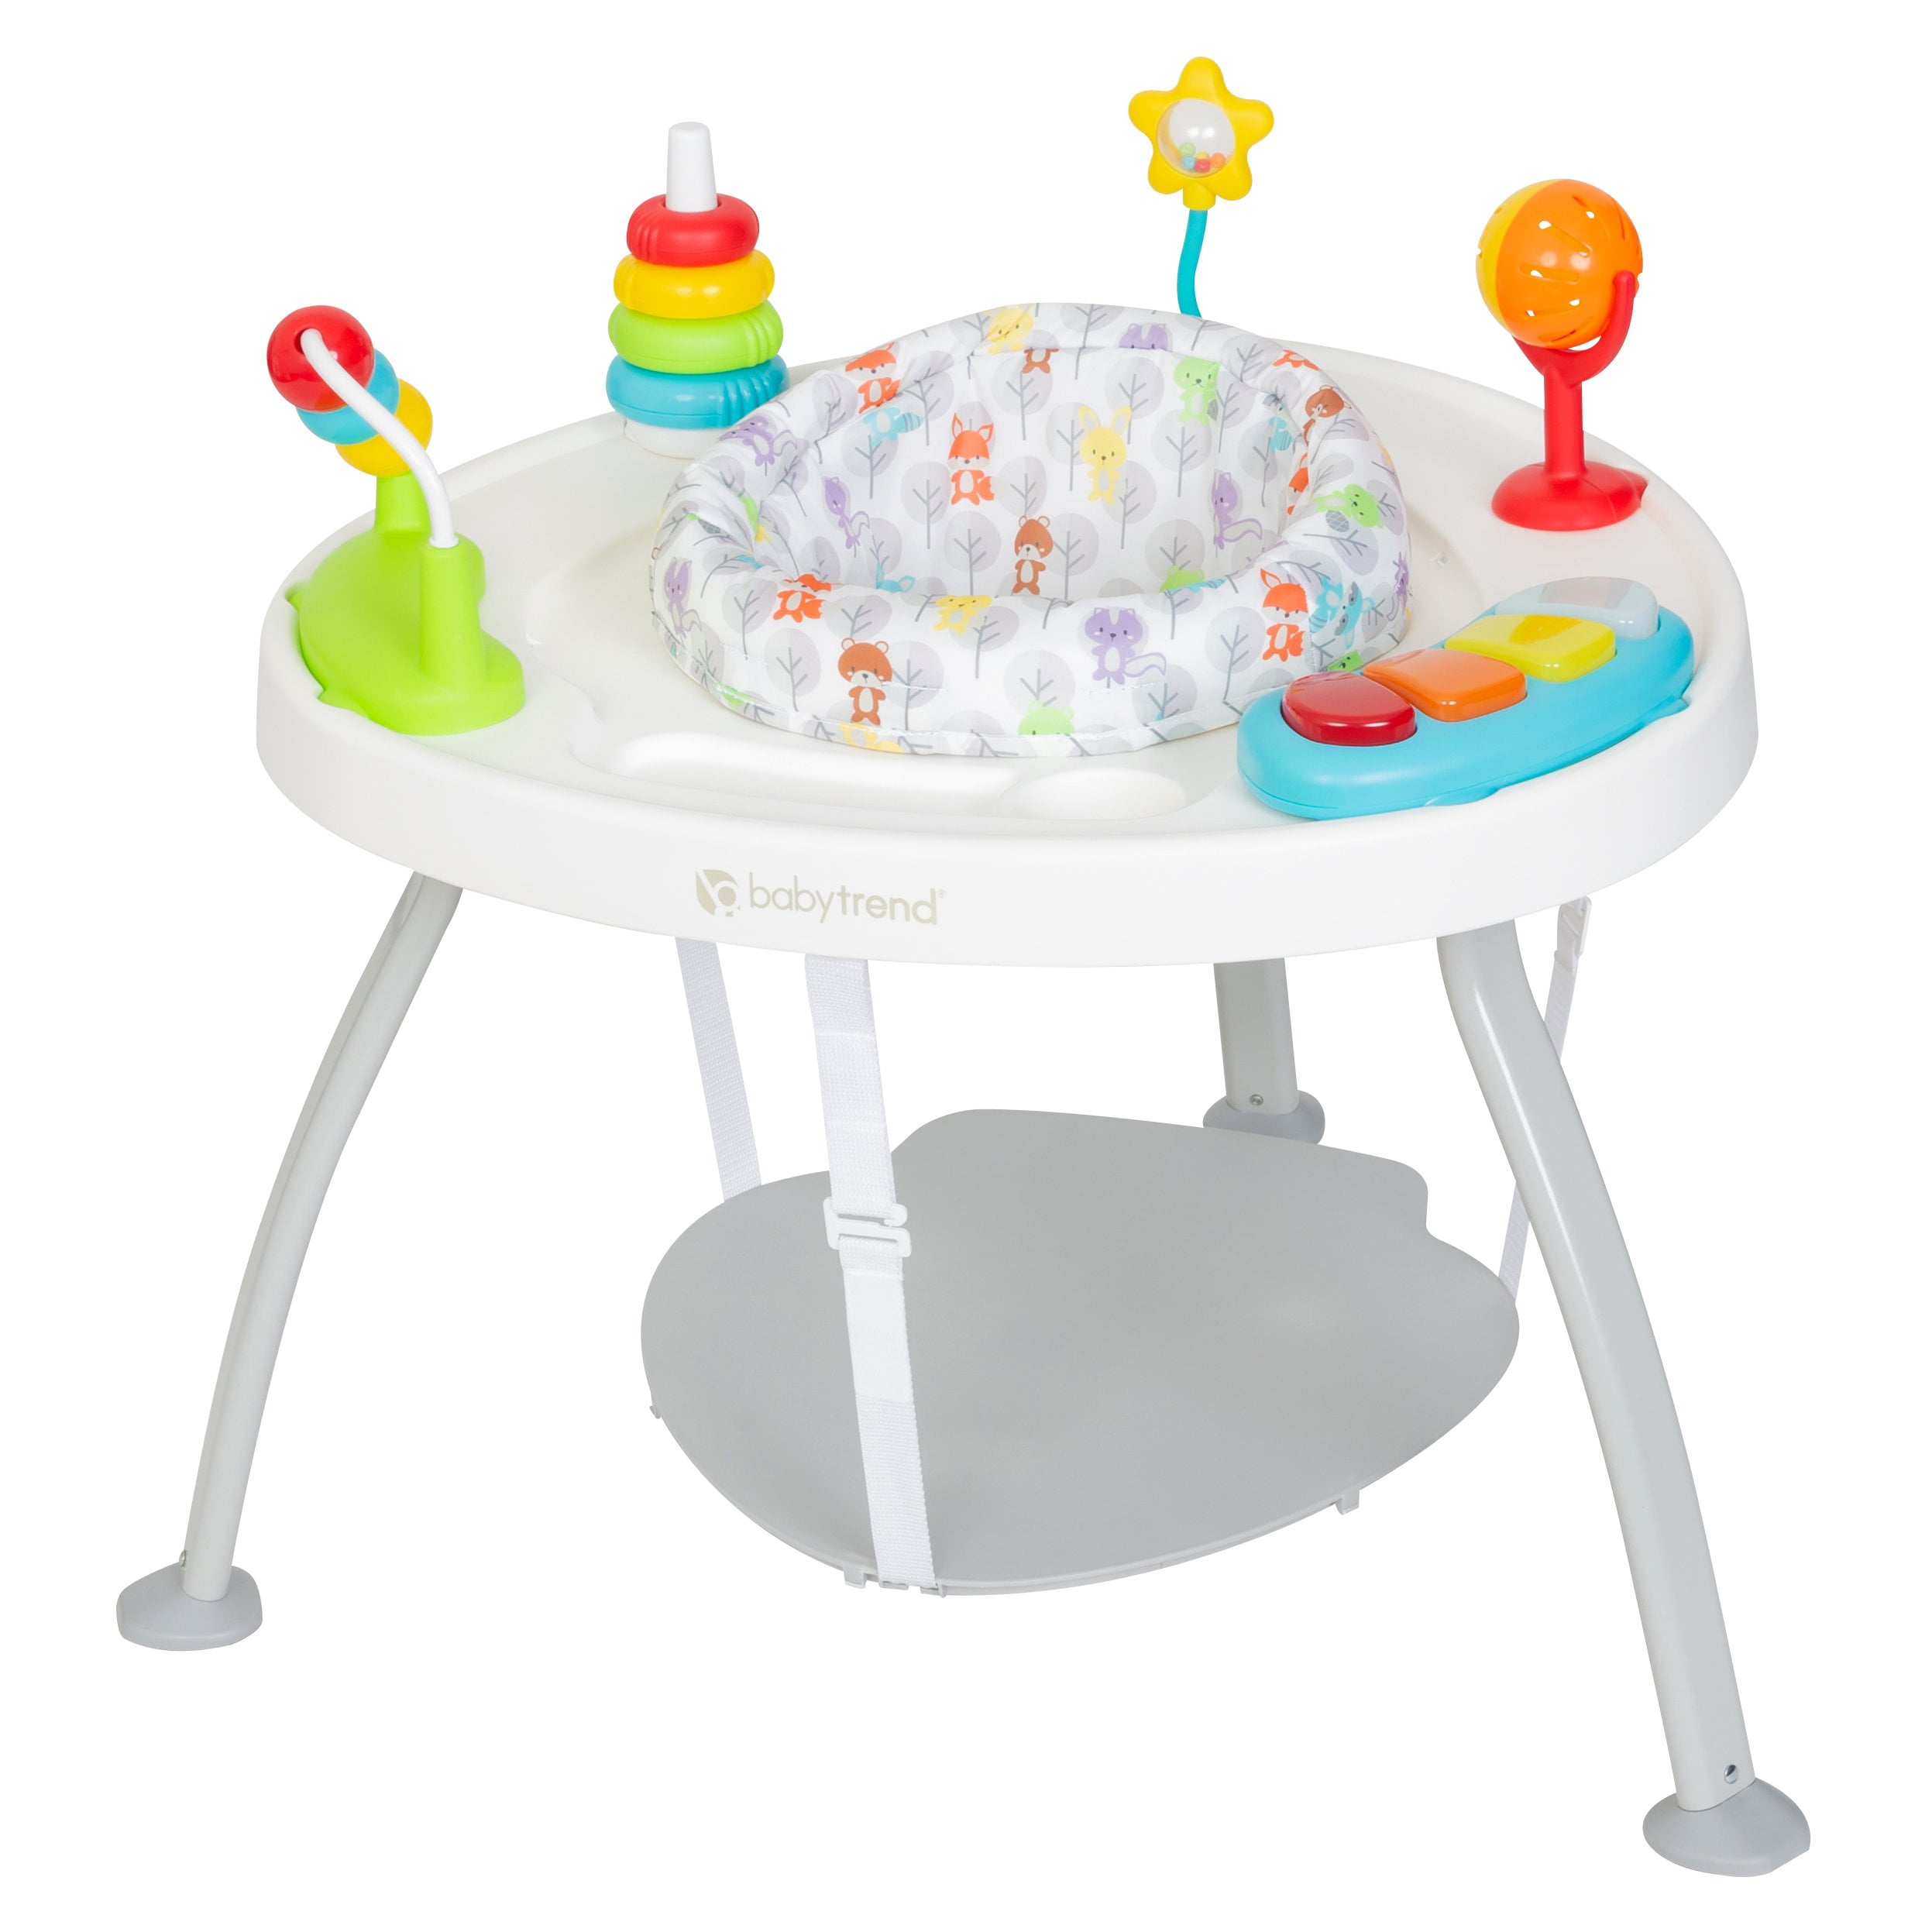 Baby Trend 3-in-1 Bounce N’ Play Activity Center